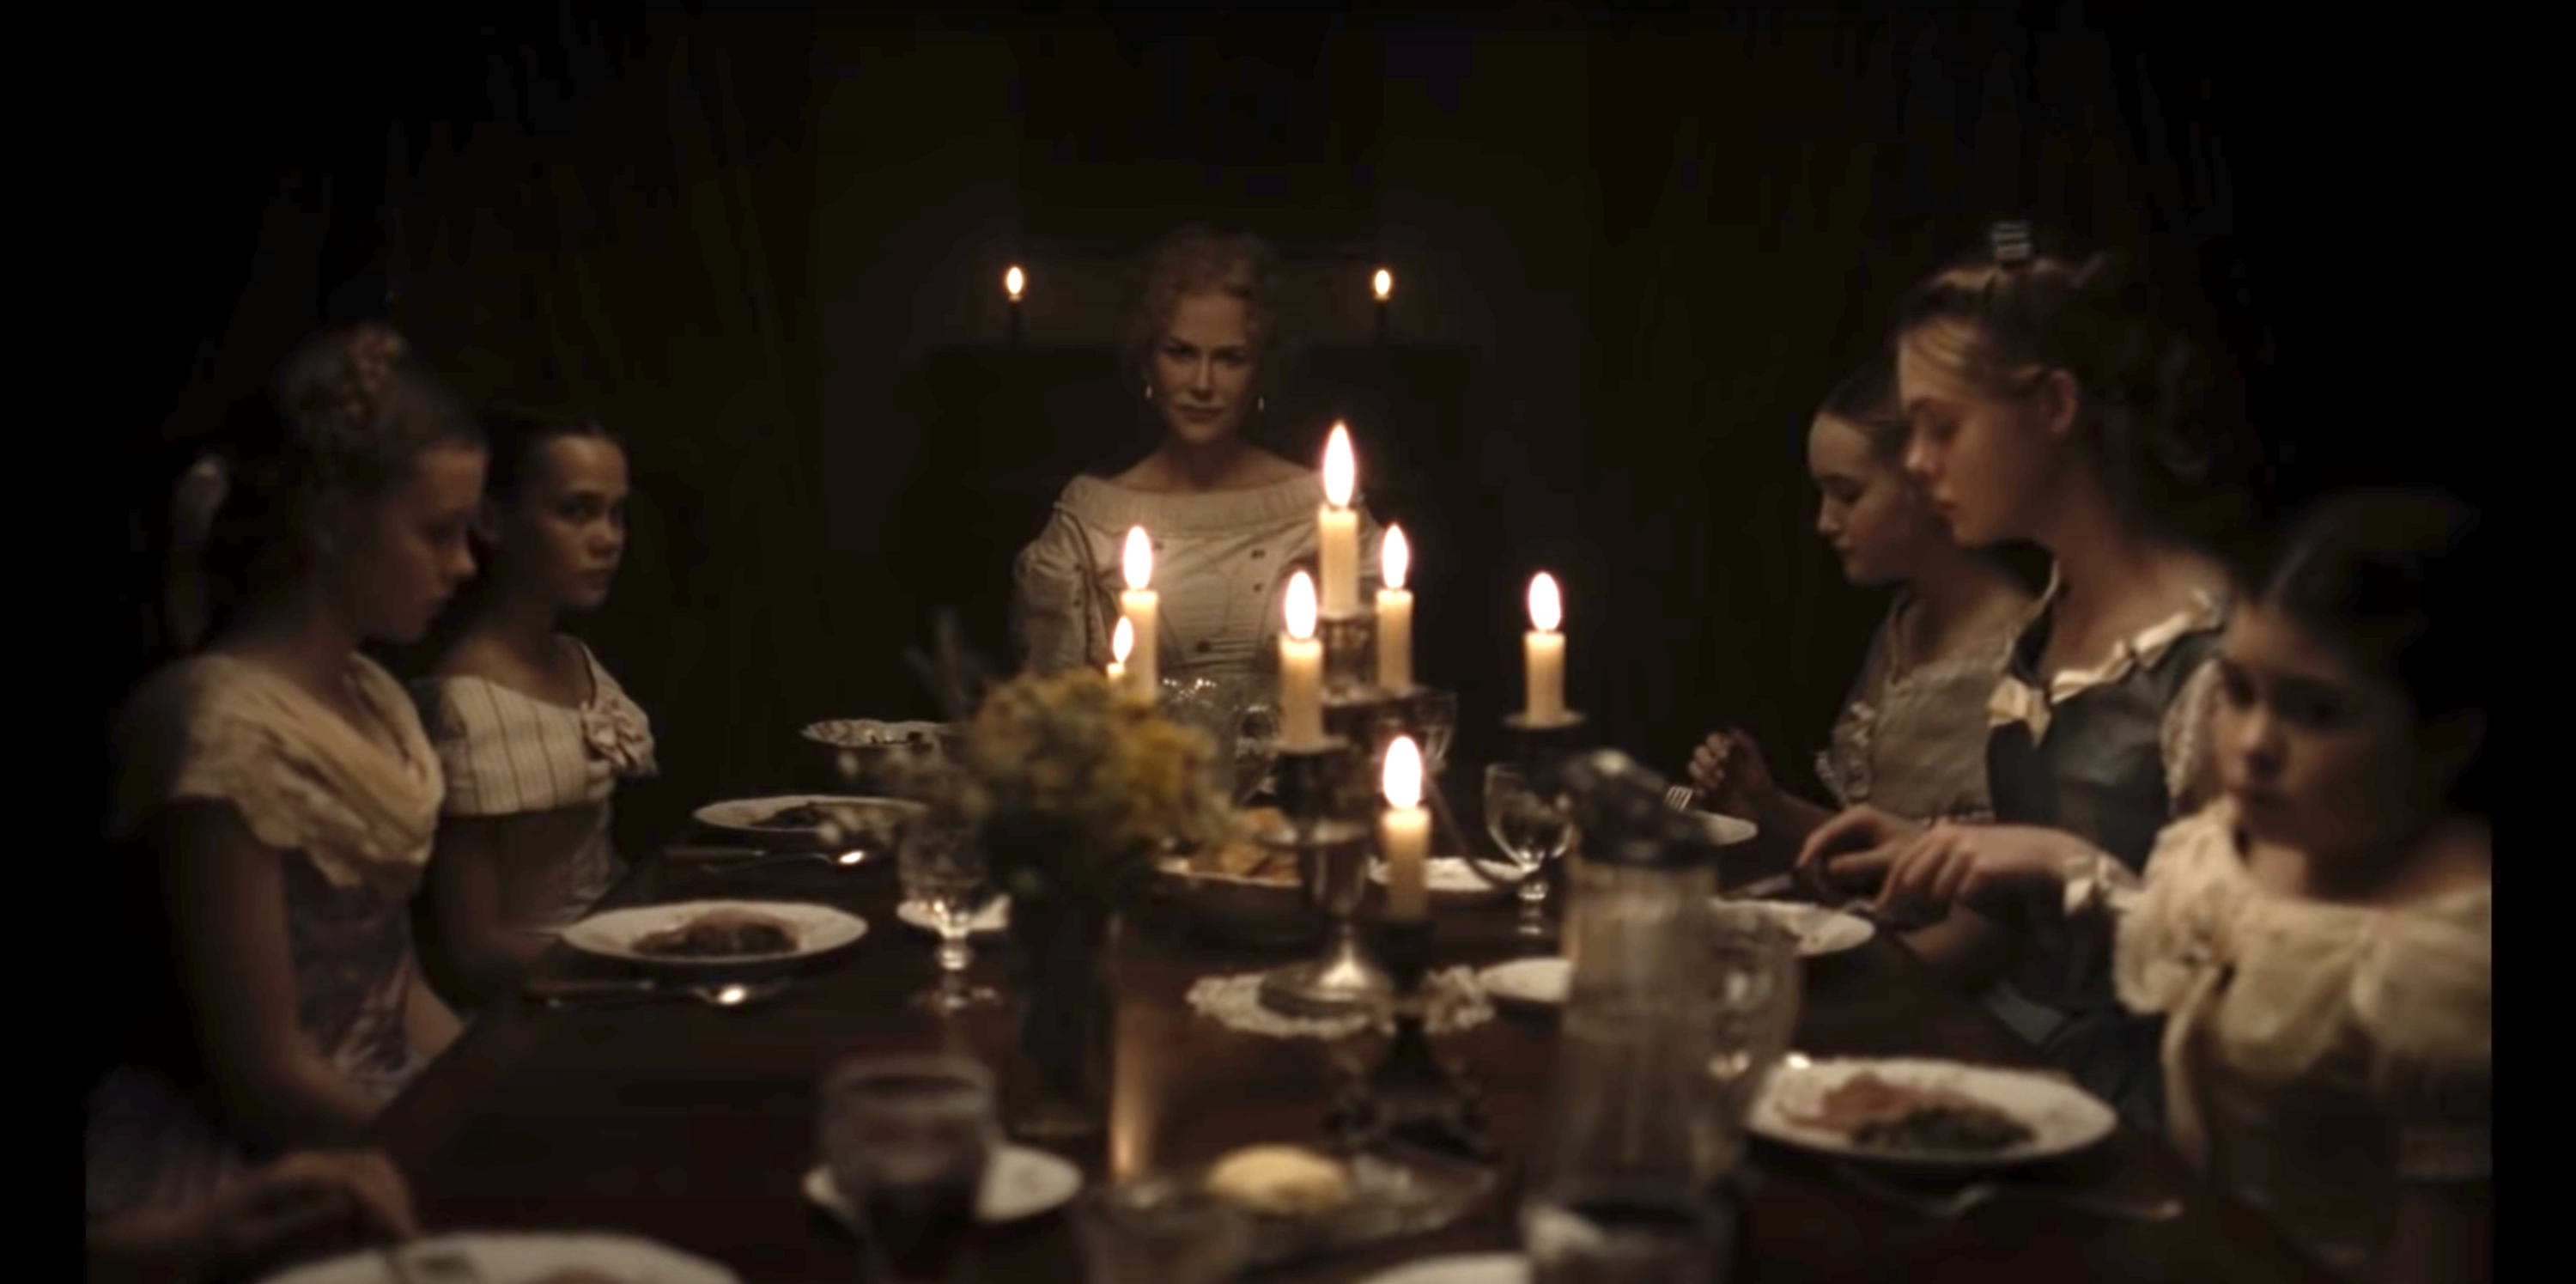 Nicole Kidman as &quot;Martha&quot; sits at the head of the table with her daughters after just poisoning a disruptive house guest in &quot;The Beguiled&quot;